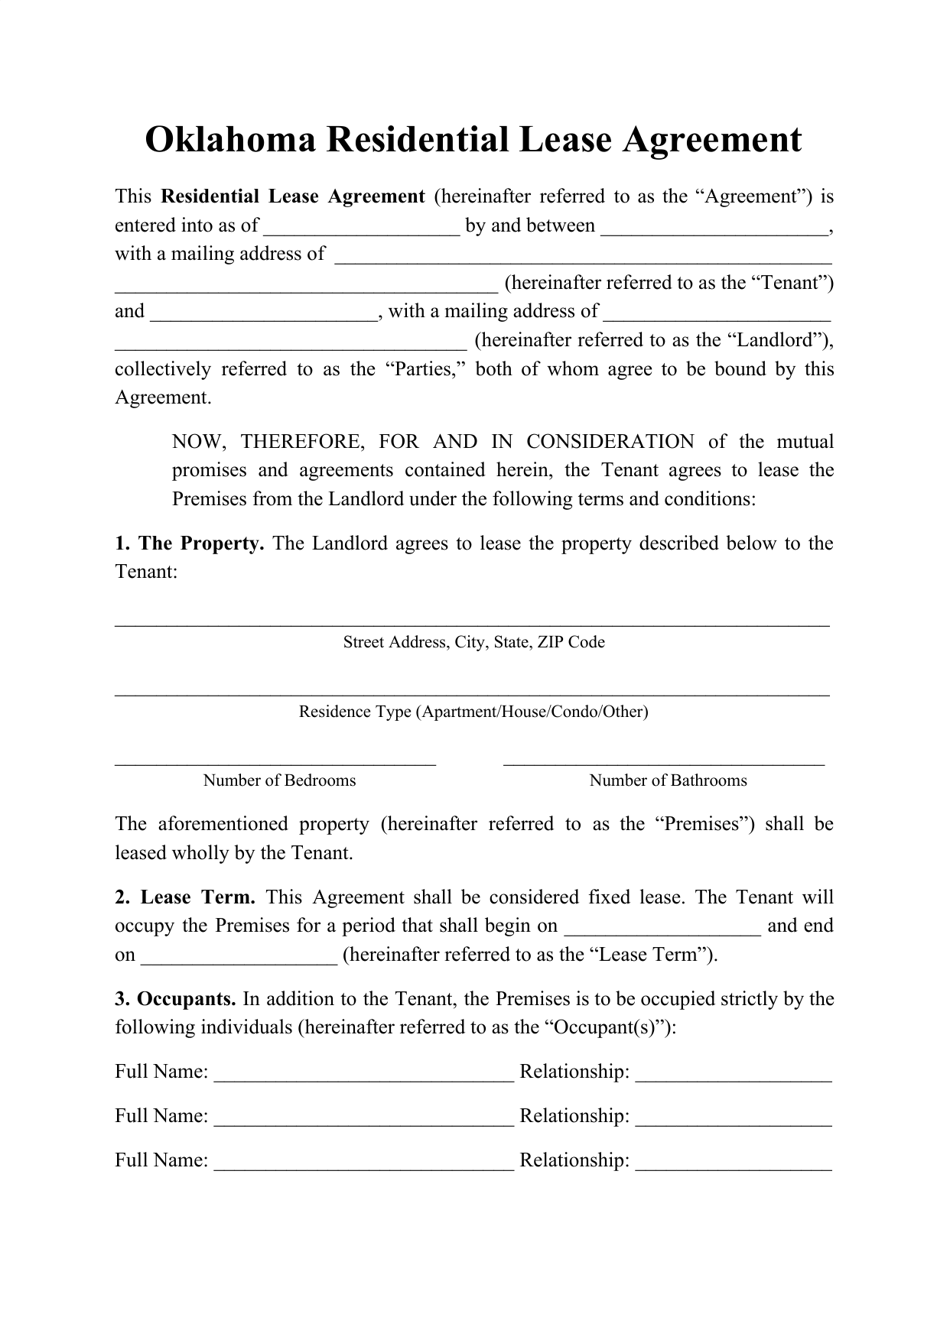 oklahoma residential lease agreement template download printable pdf templateroller